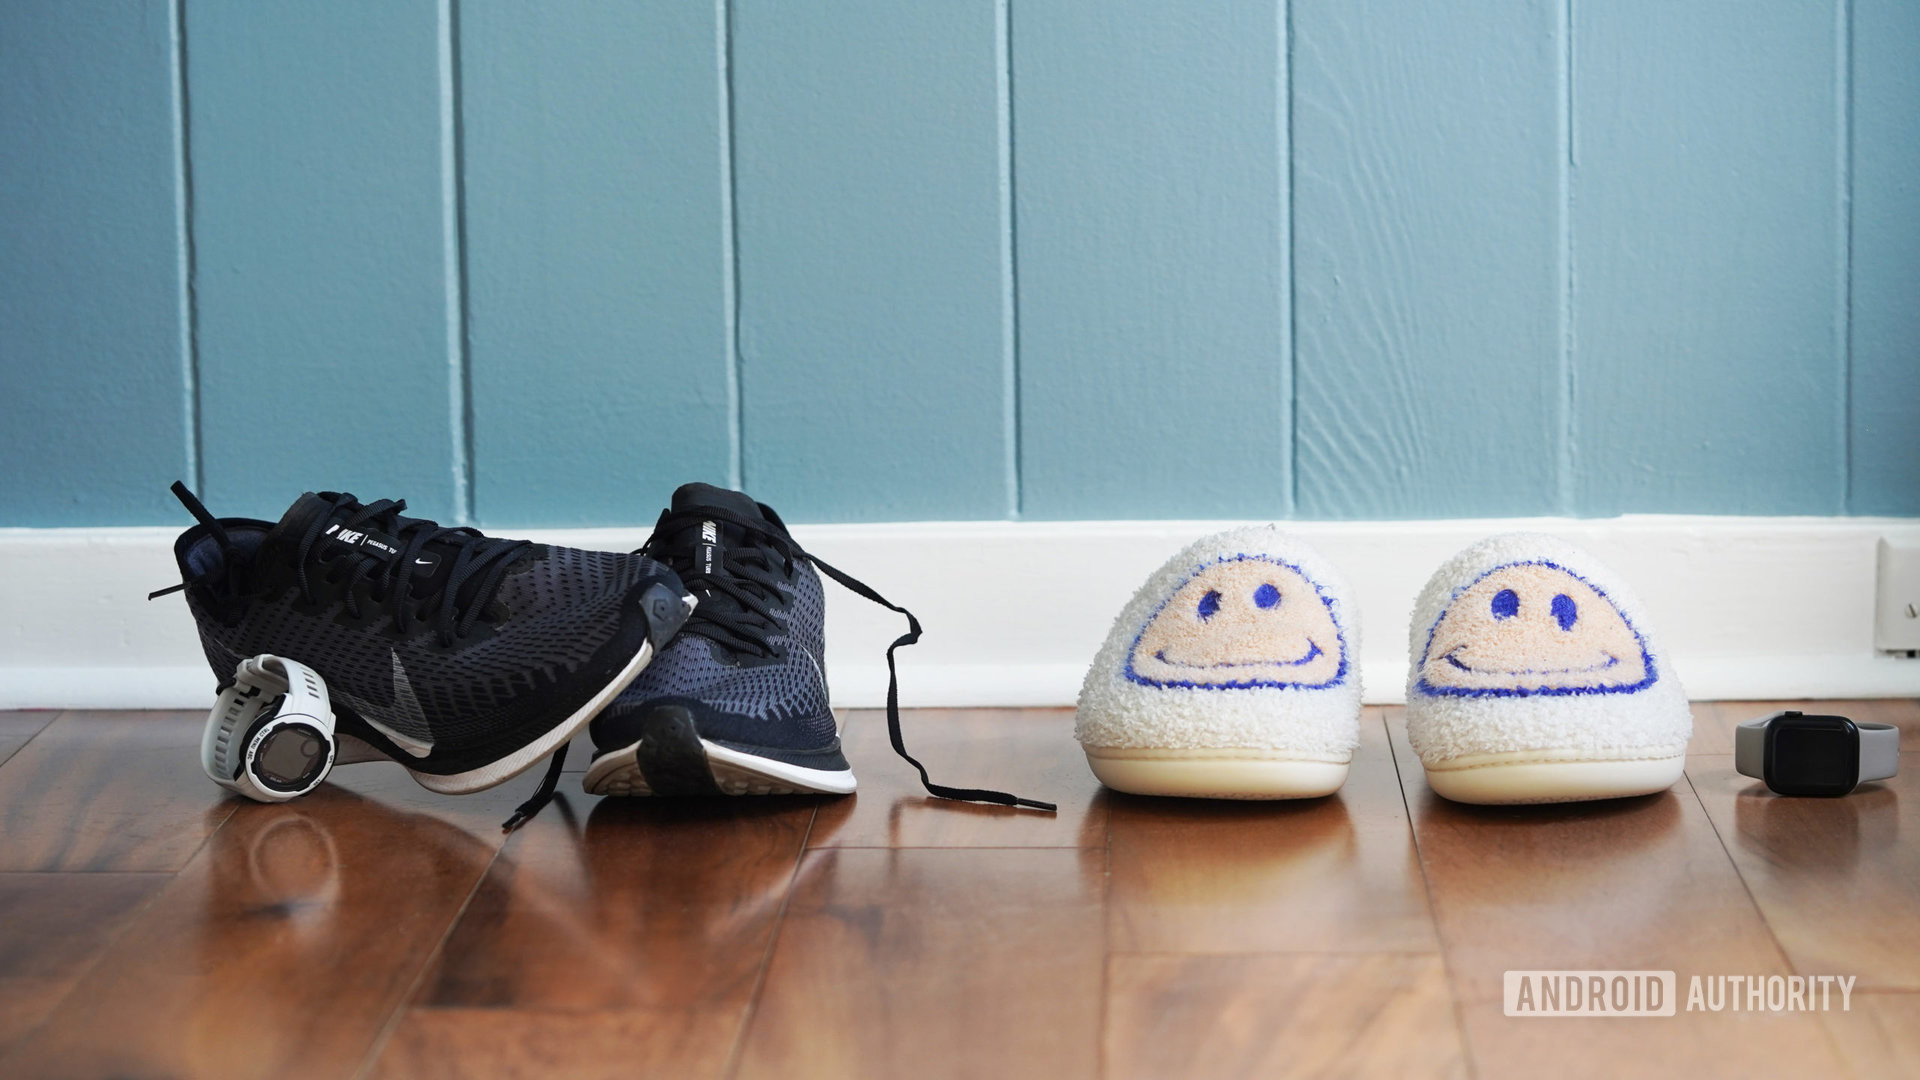 A pair of men's sneakers resting next to a pair of women's slippers.